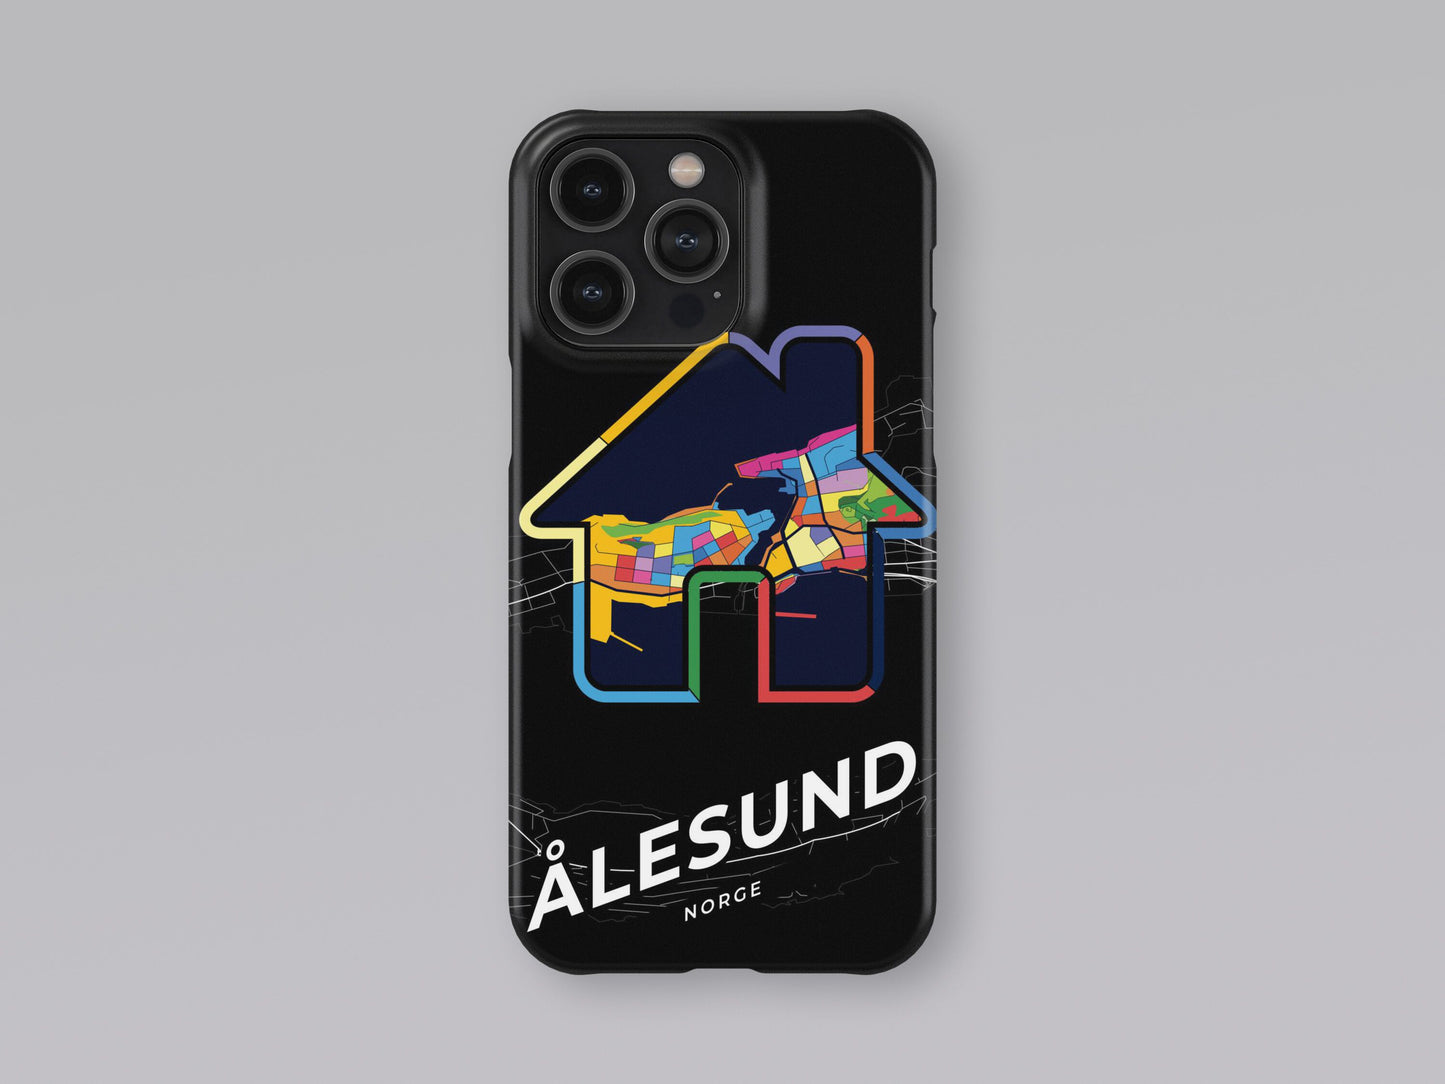 Ålesund Norway slim phone case with colorful icon. Birthday, wedding or housewarming gift. Couple match cases. 3